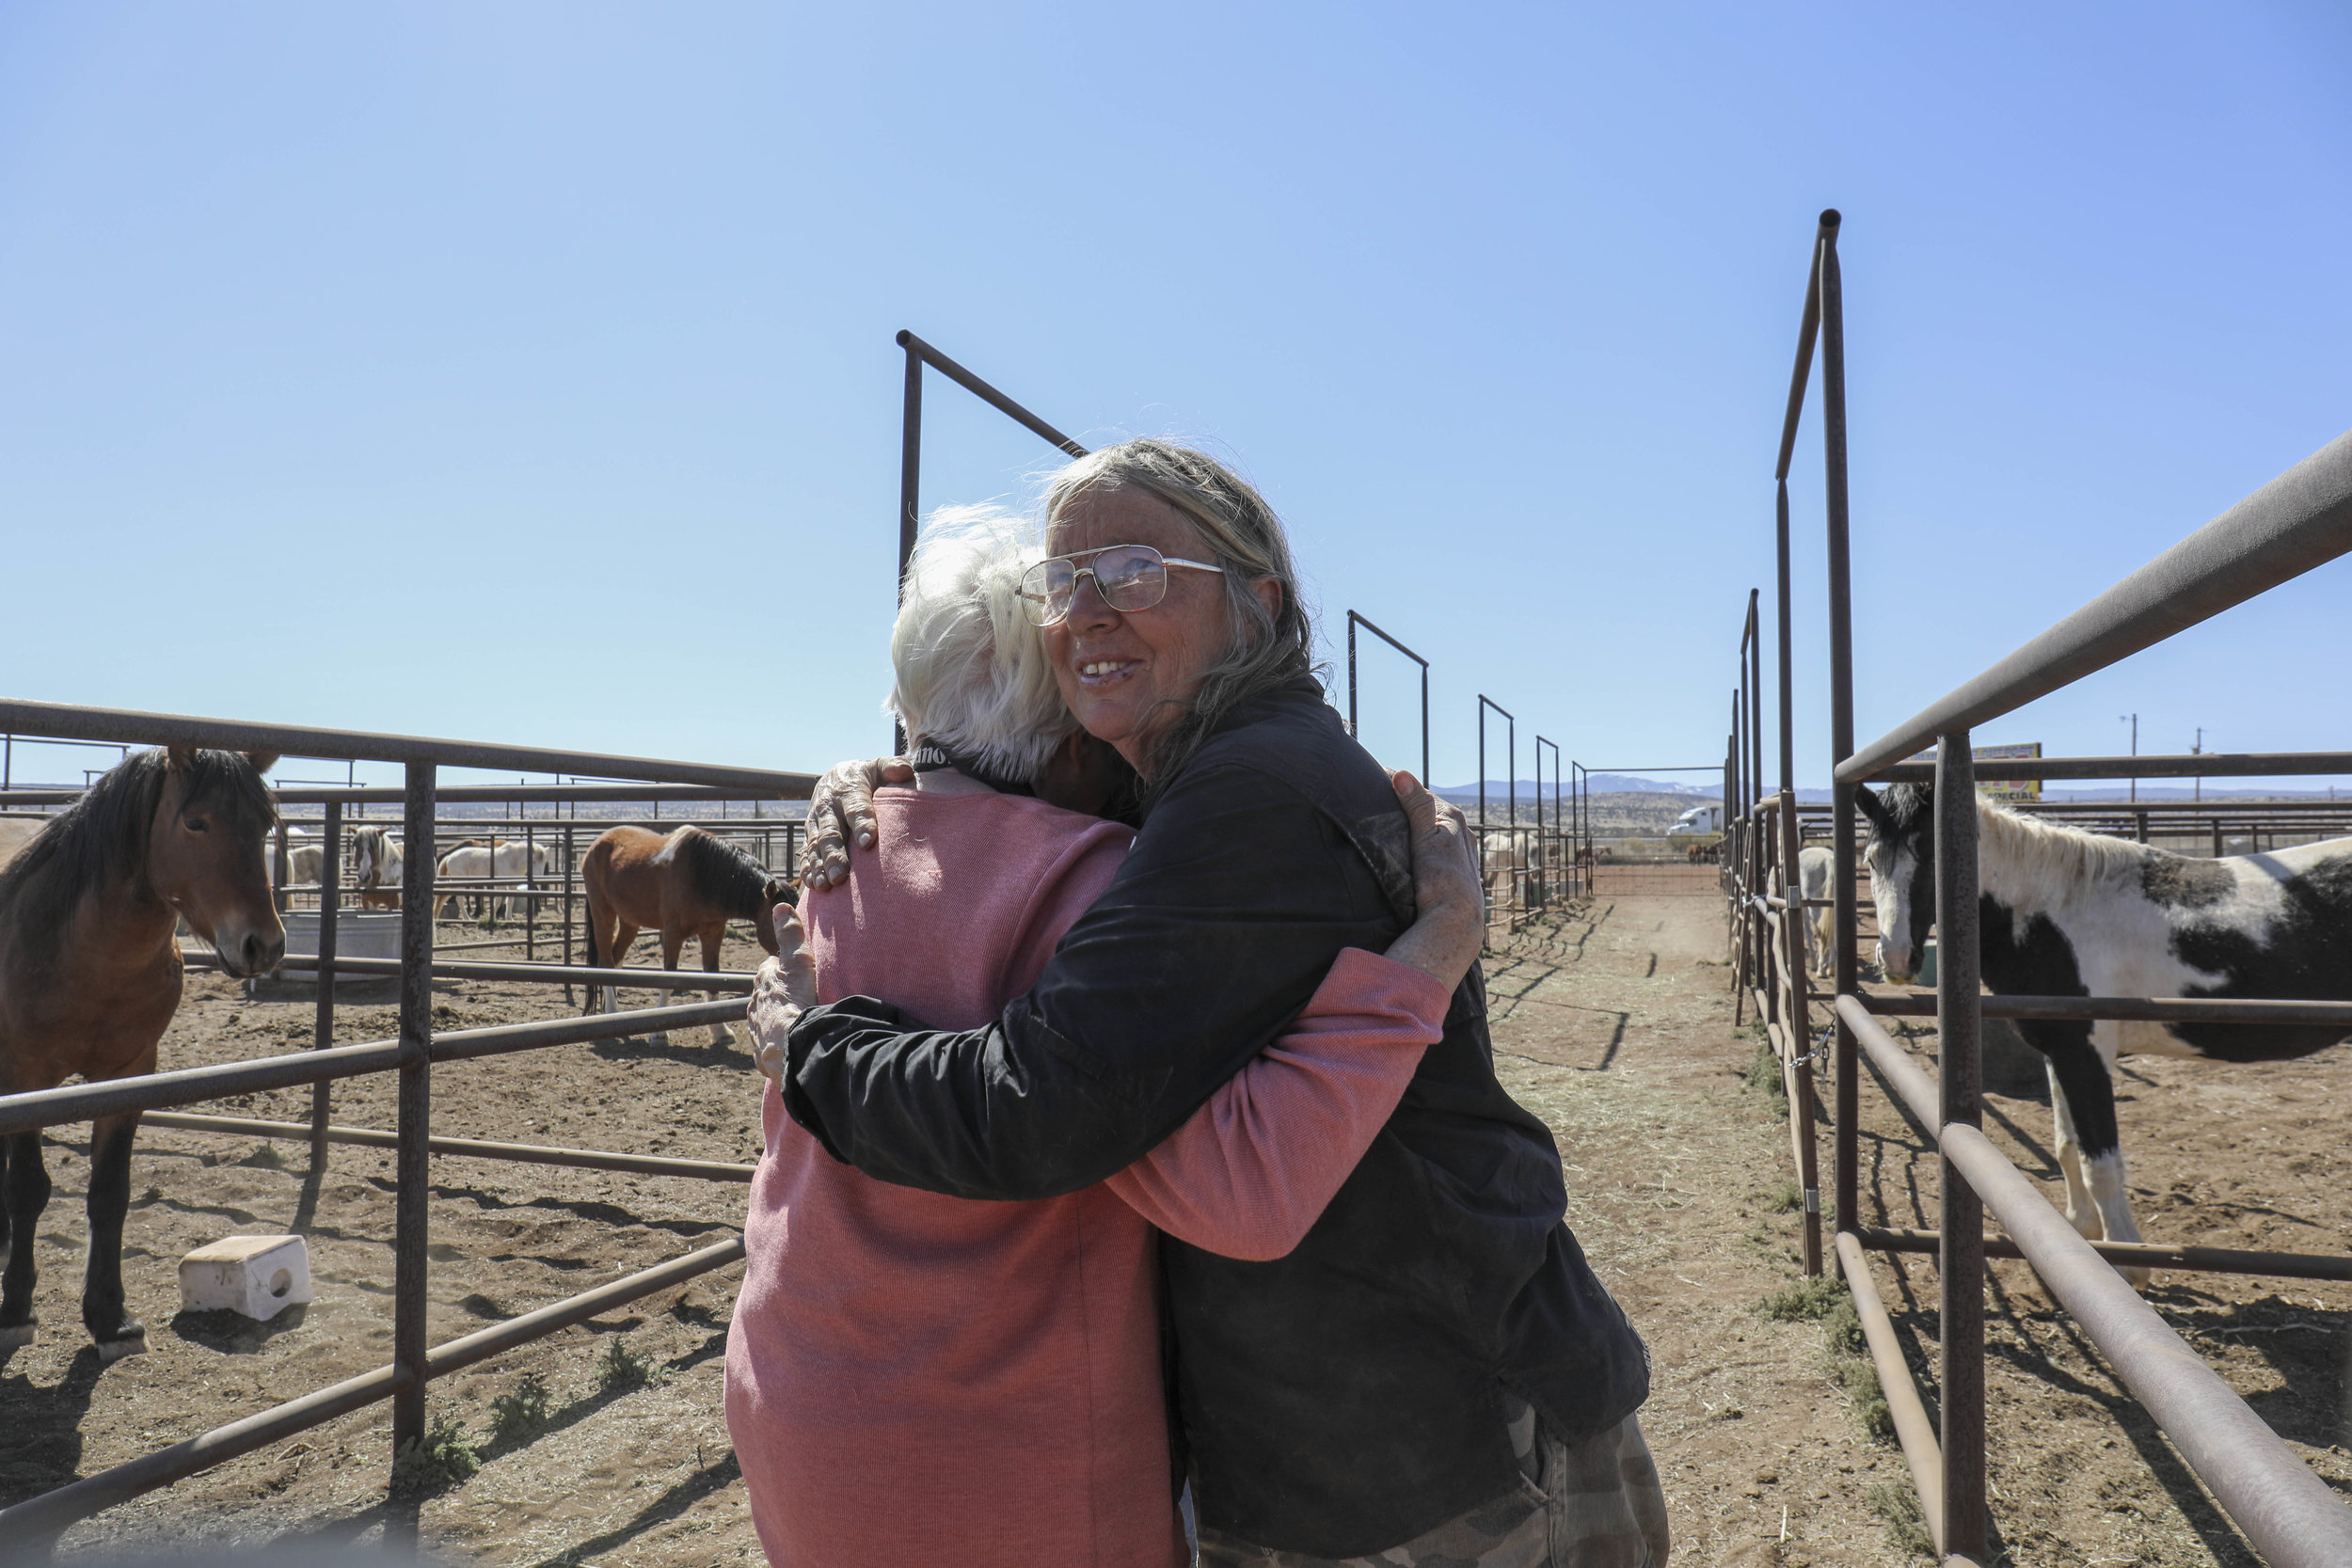  When the horses arrived at Mustang Camp, Johnson thanked Patricia Barlow-Irick, its founder. Mustang Camp typically receives horses from BLM holding pens, but the federal government shutdown in December and January slowed their supply of BLM mustang